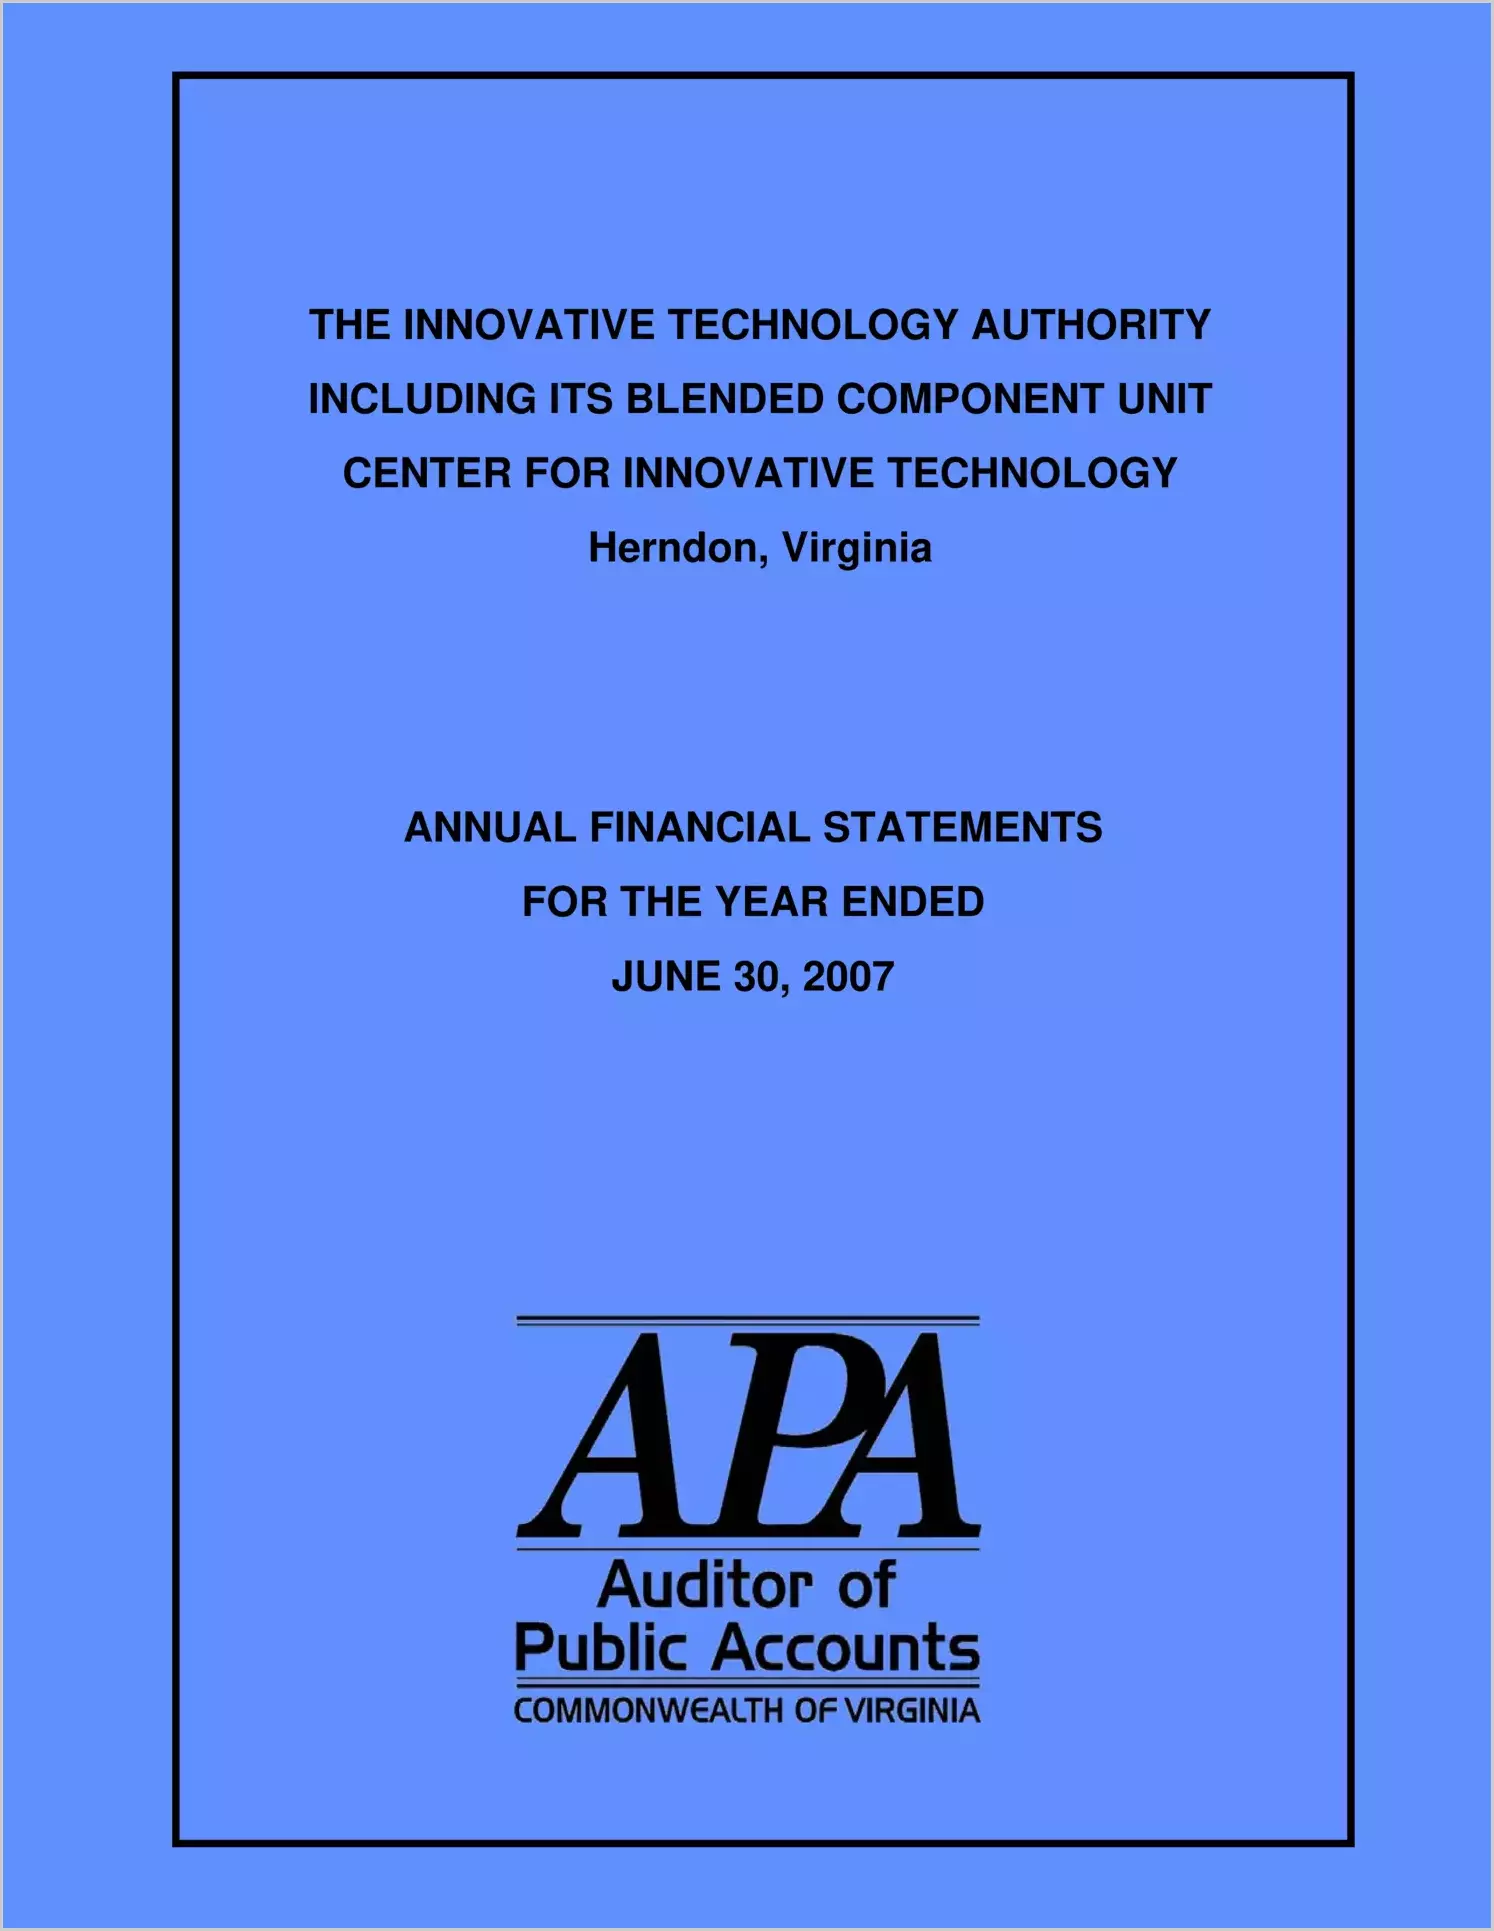 The Innovative Technology Authority Including Its Blended Component Unit Center for Innovative Technology for the year ended June 30, 2007